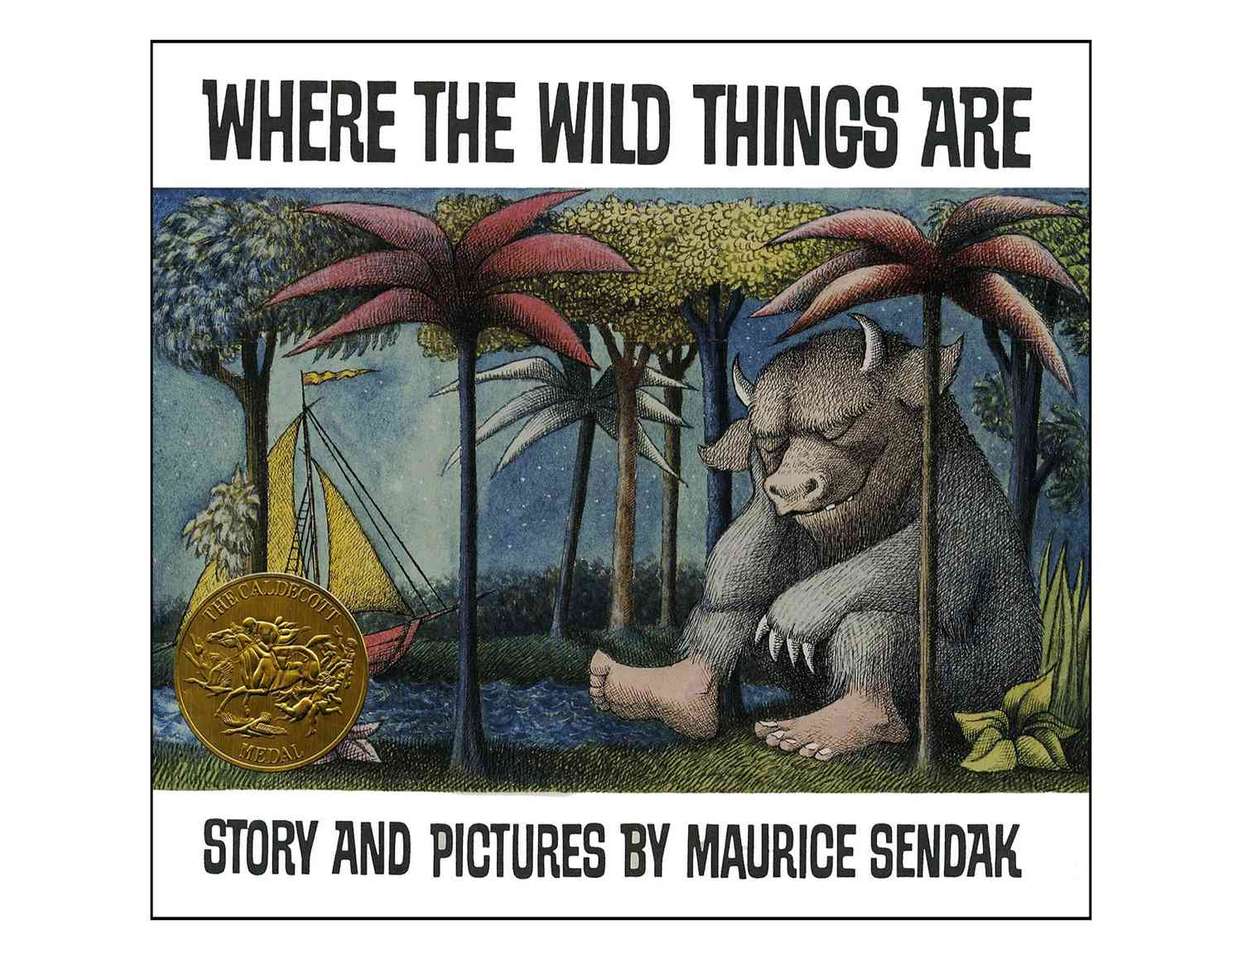 Obal knihy „Where the Wild Things Are“. online puzzle